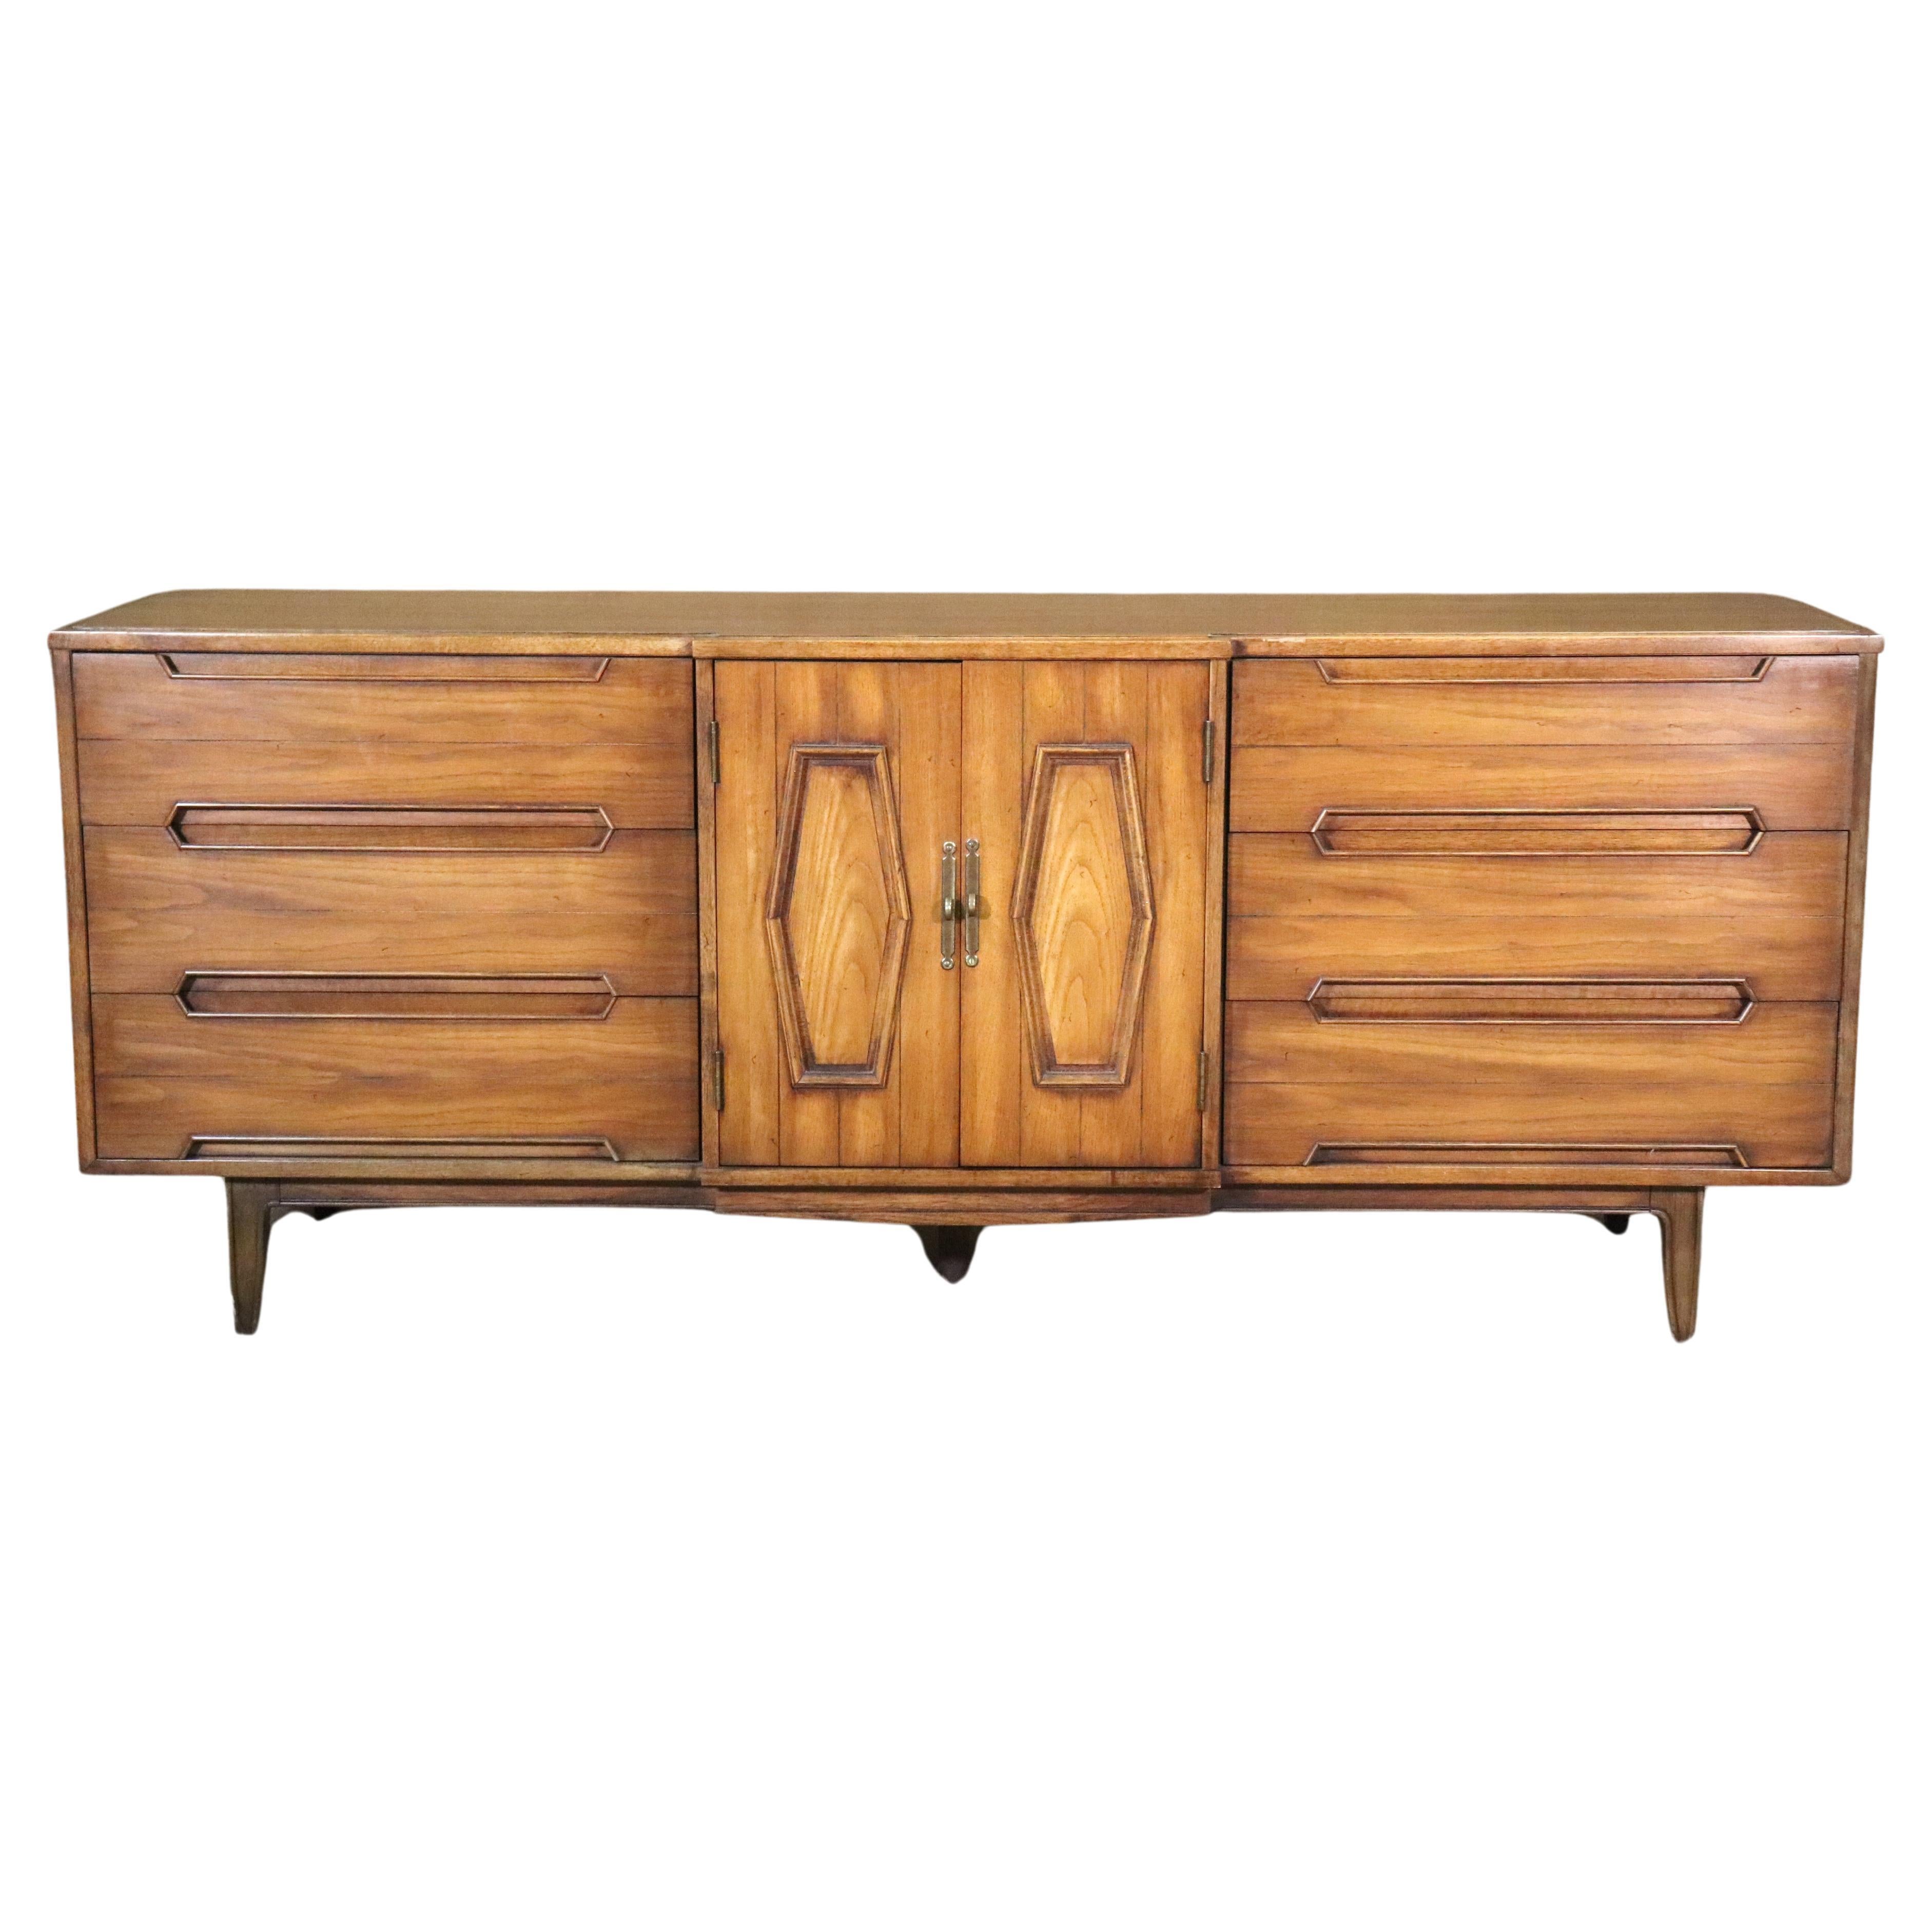 'Omega' Series Dresser by Thomasville